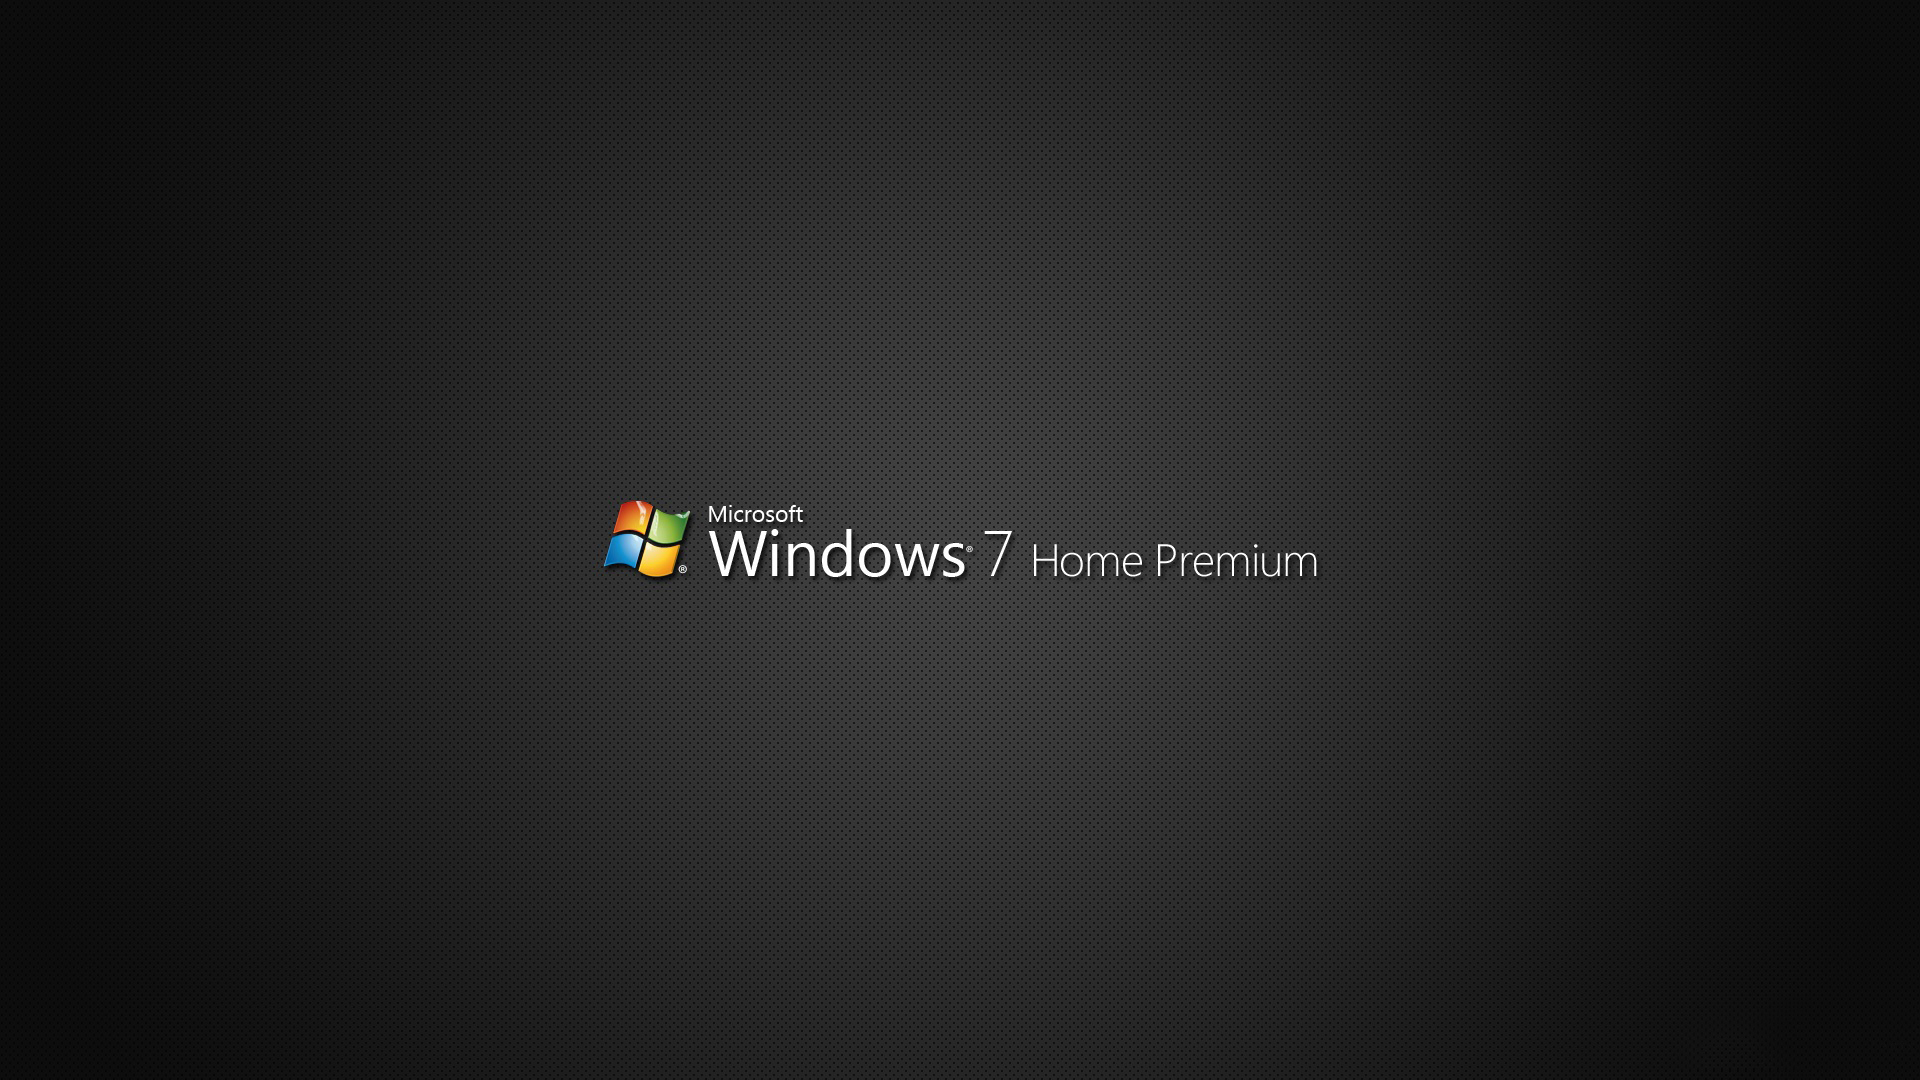 Windows 7 Home Premium Wallpapers Group (62+)